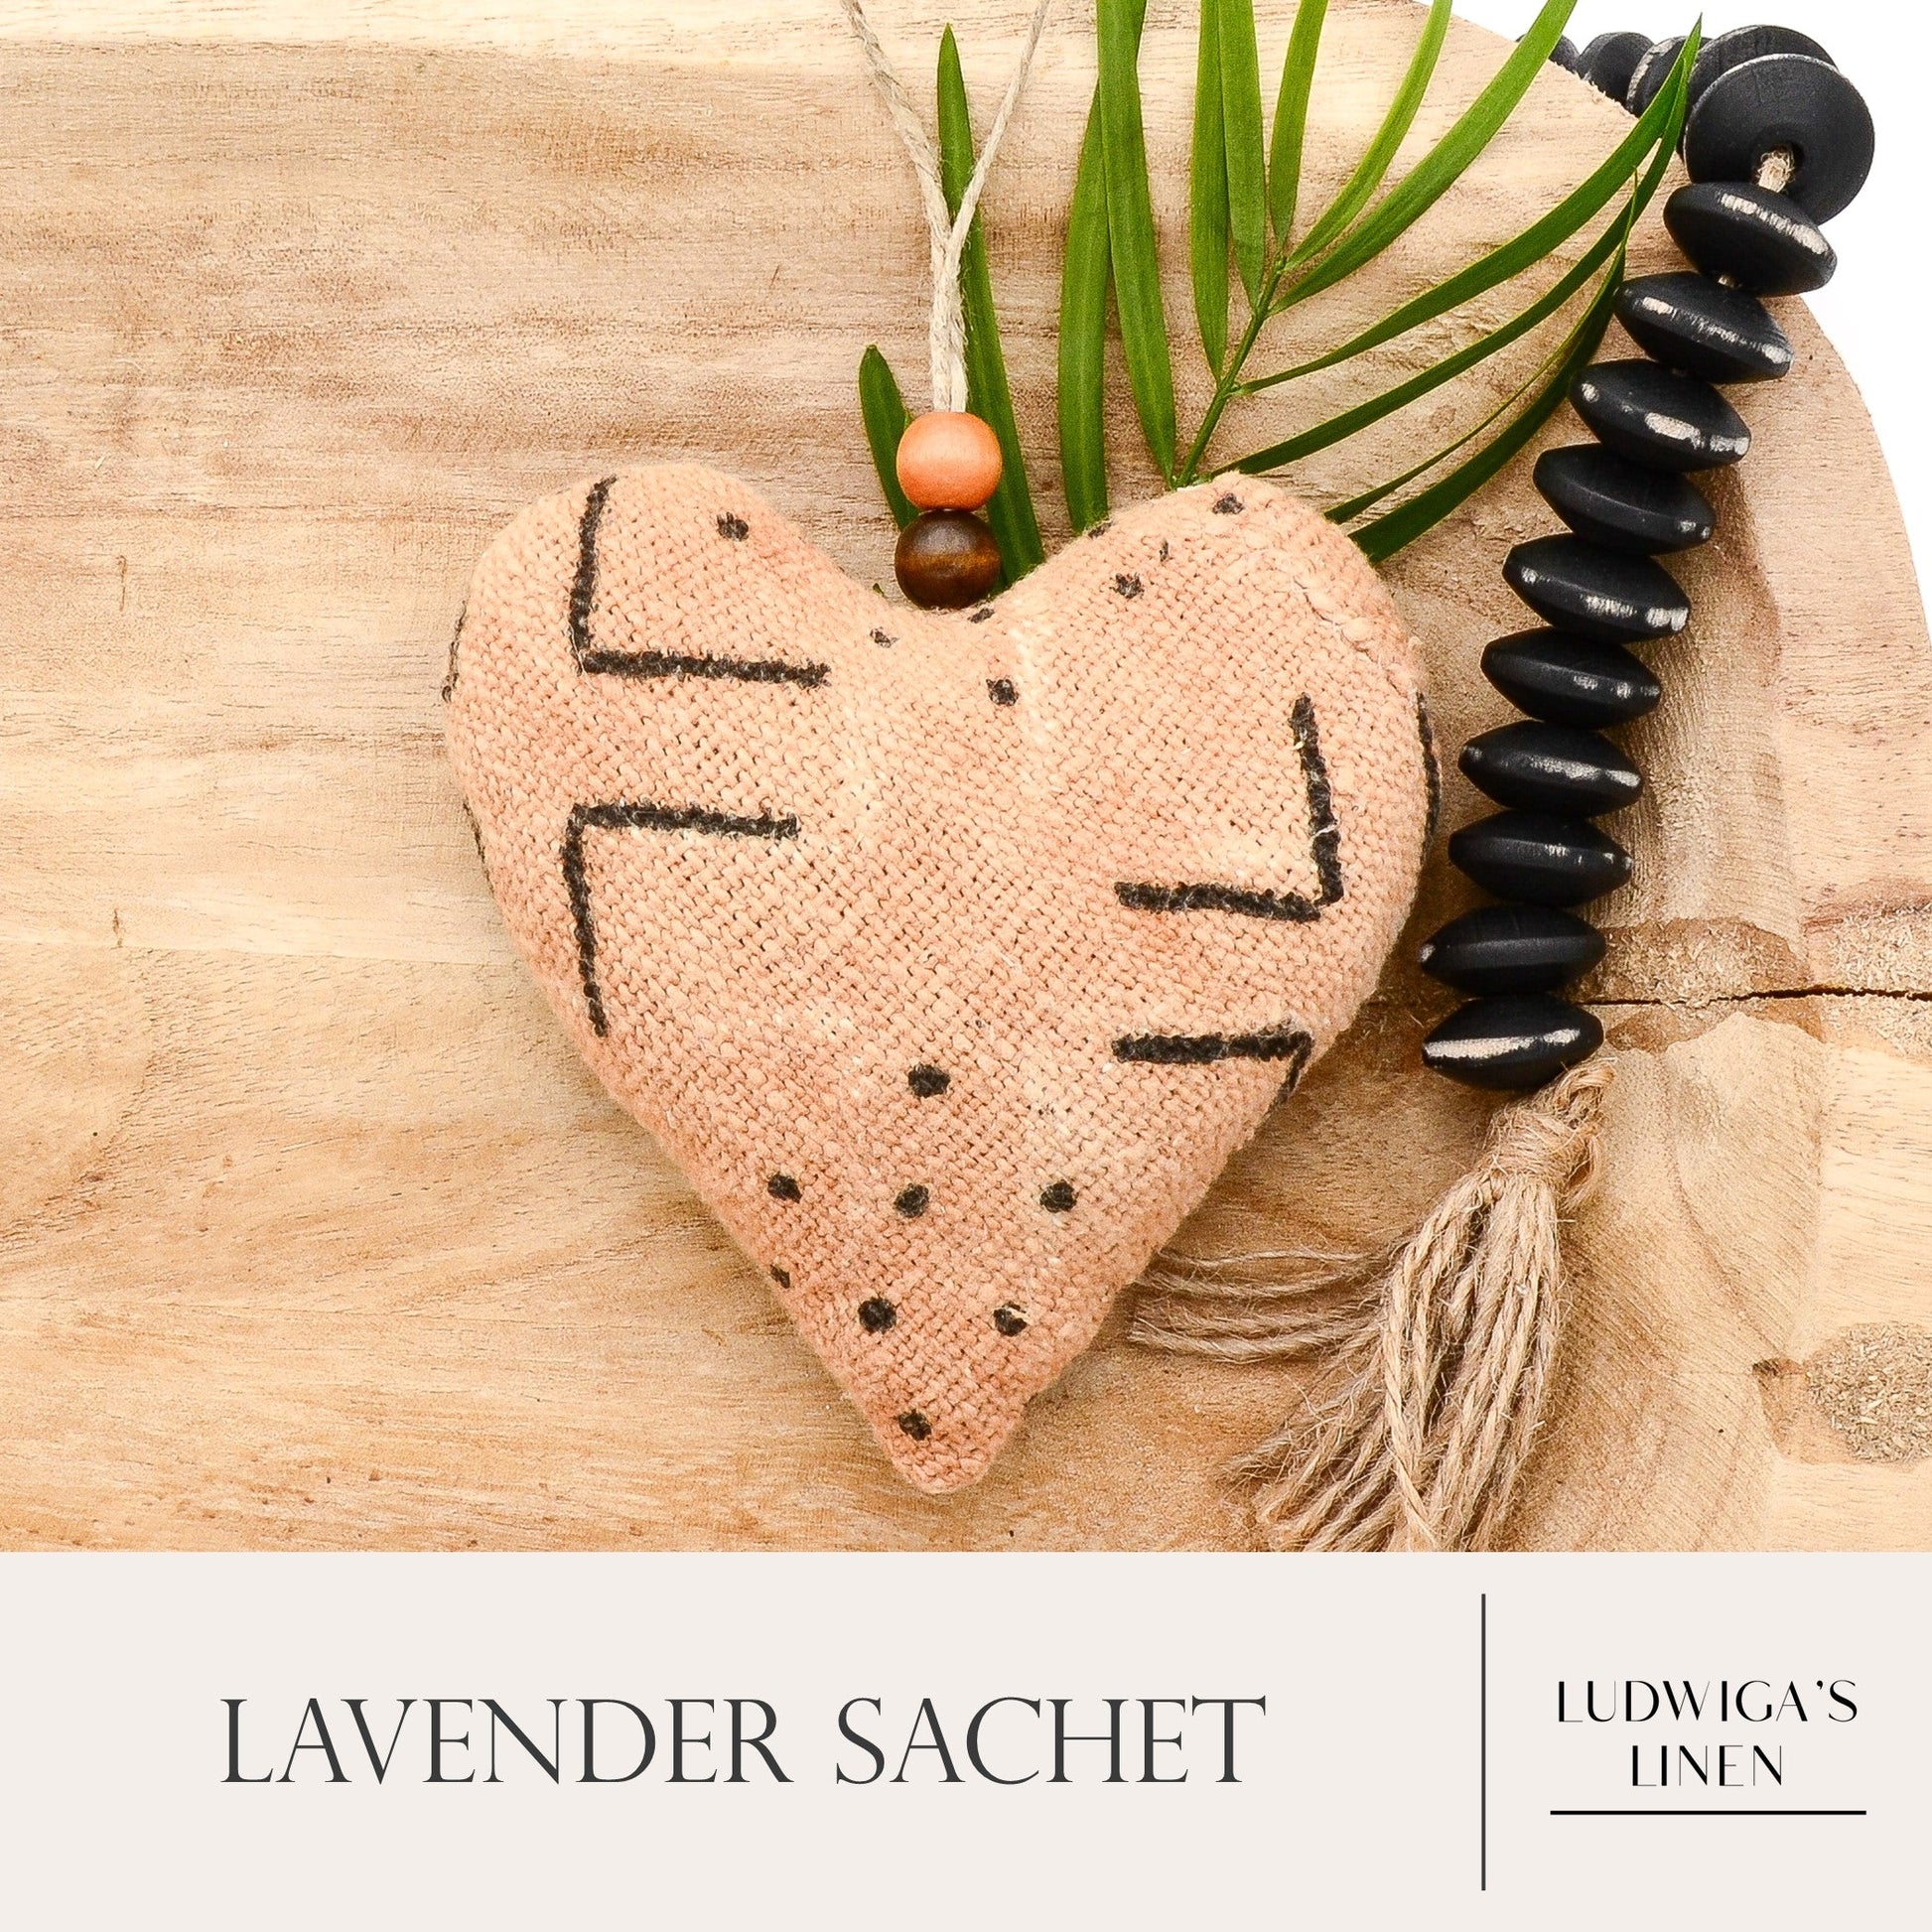 Lavender sachet heart made from handwoven African Mudcloth cotton, hemp twine tie with wooden beads, and filled with high quality lavender from Provence France